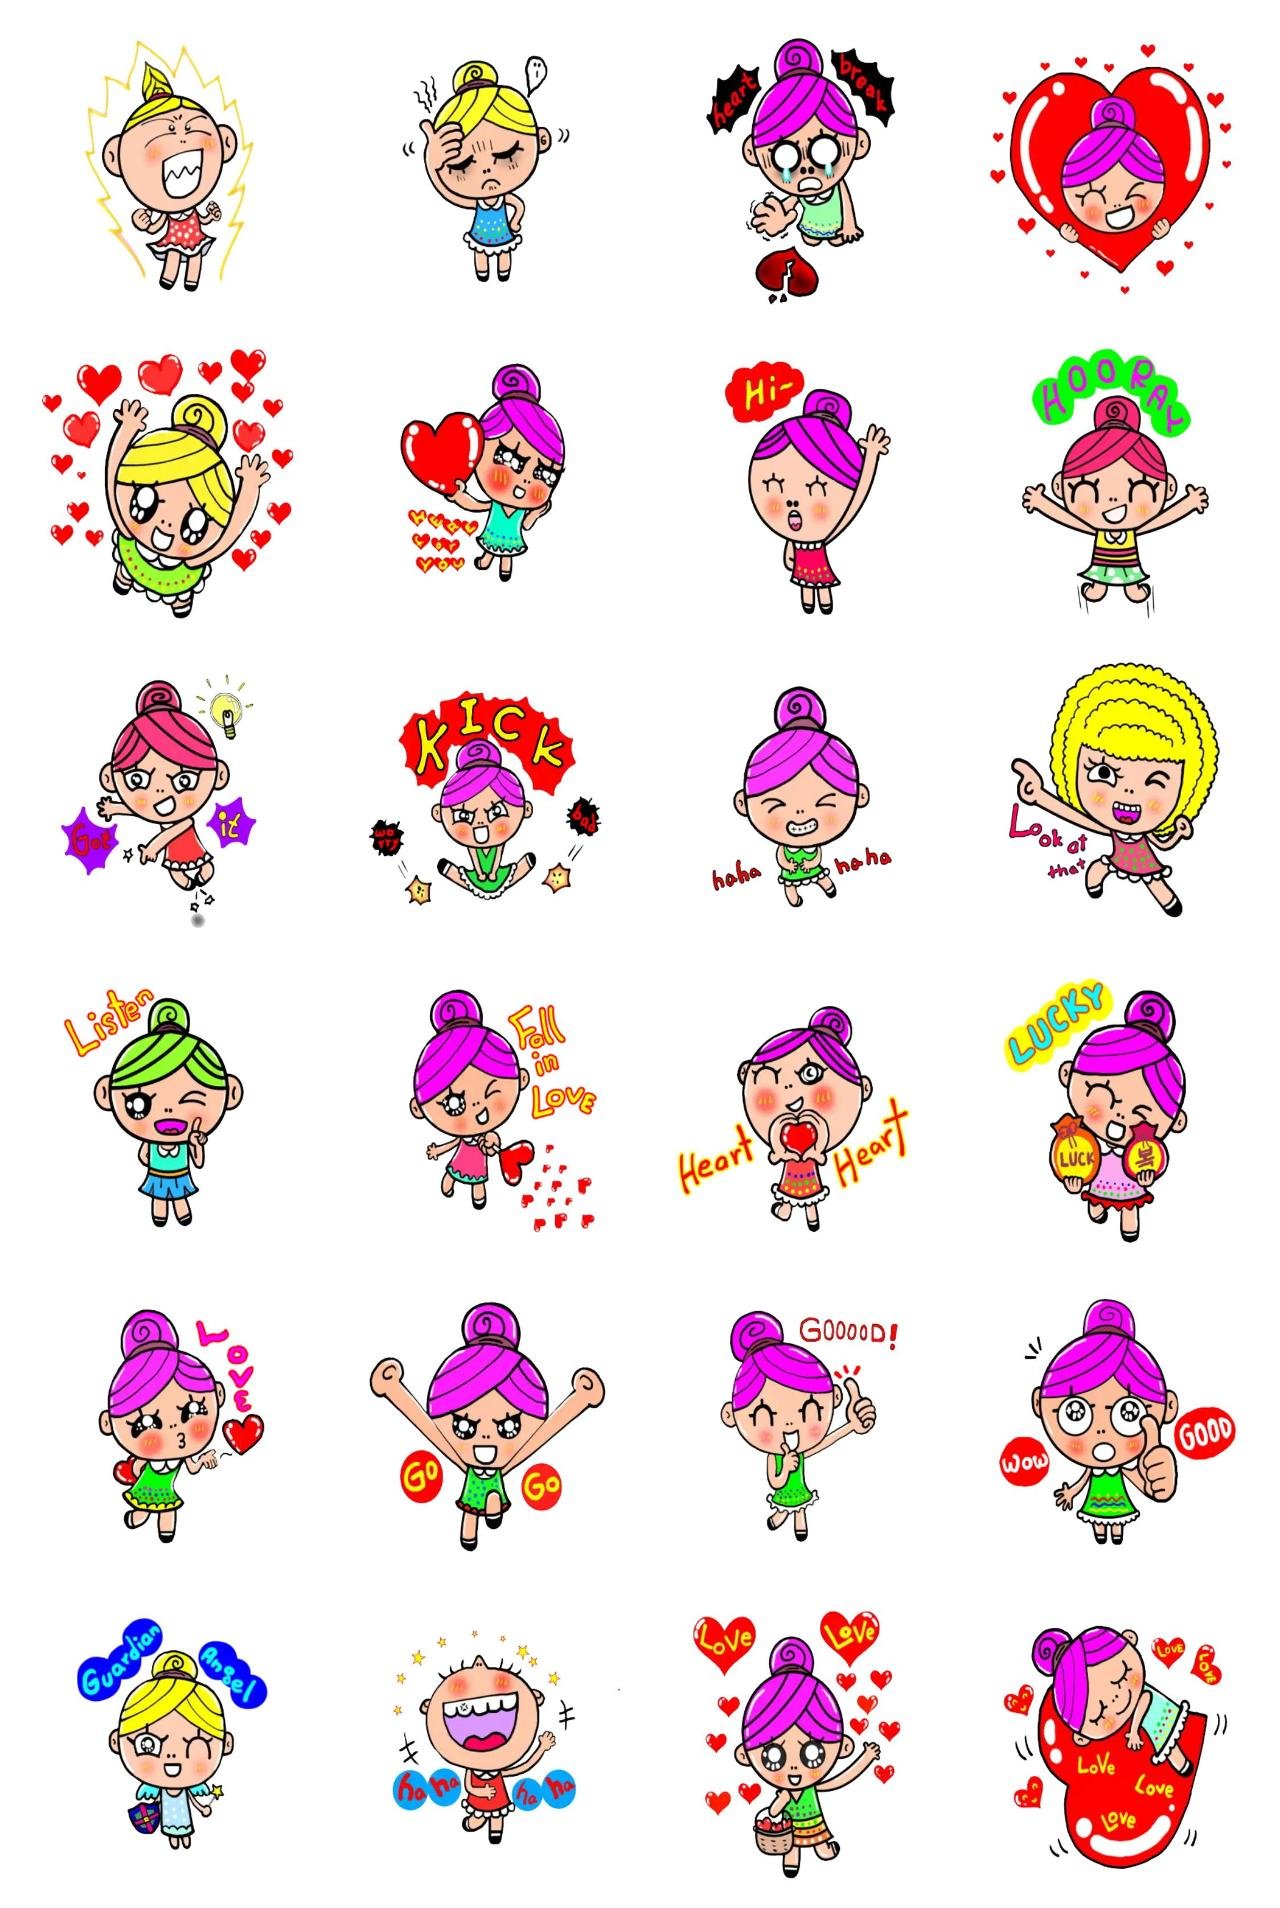 Nice Jin gives you happiness everyday People sticker pack for Whatsapp, Telegram, Signal, and others chatting and message apps